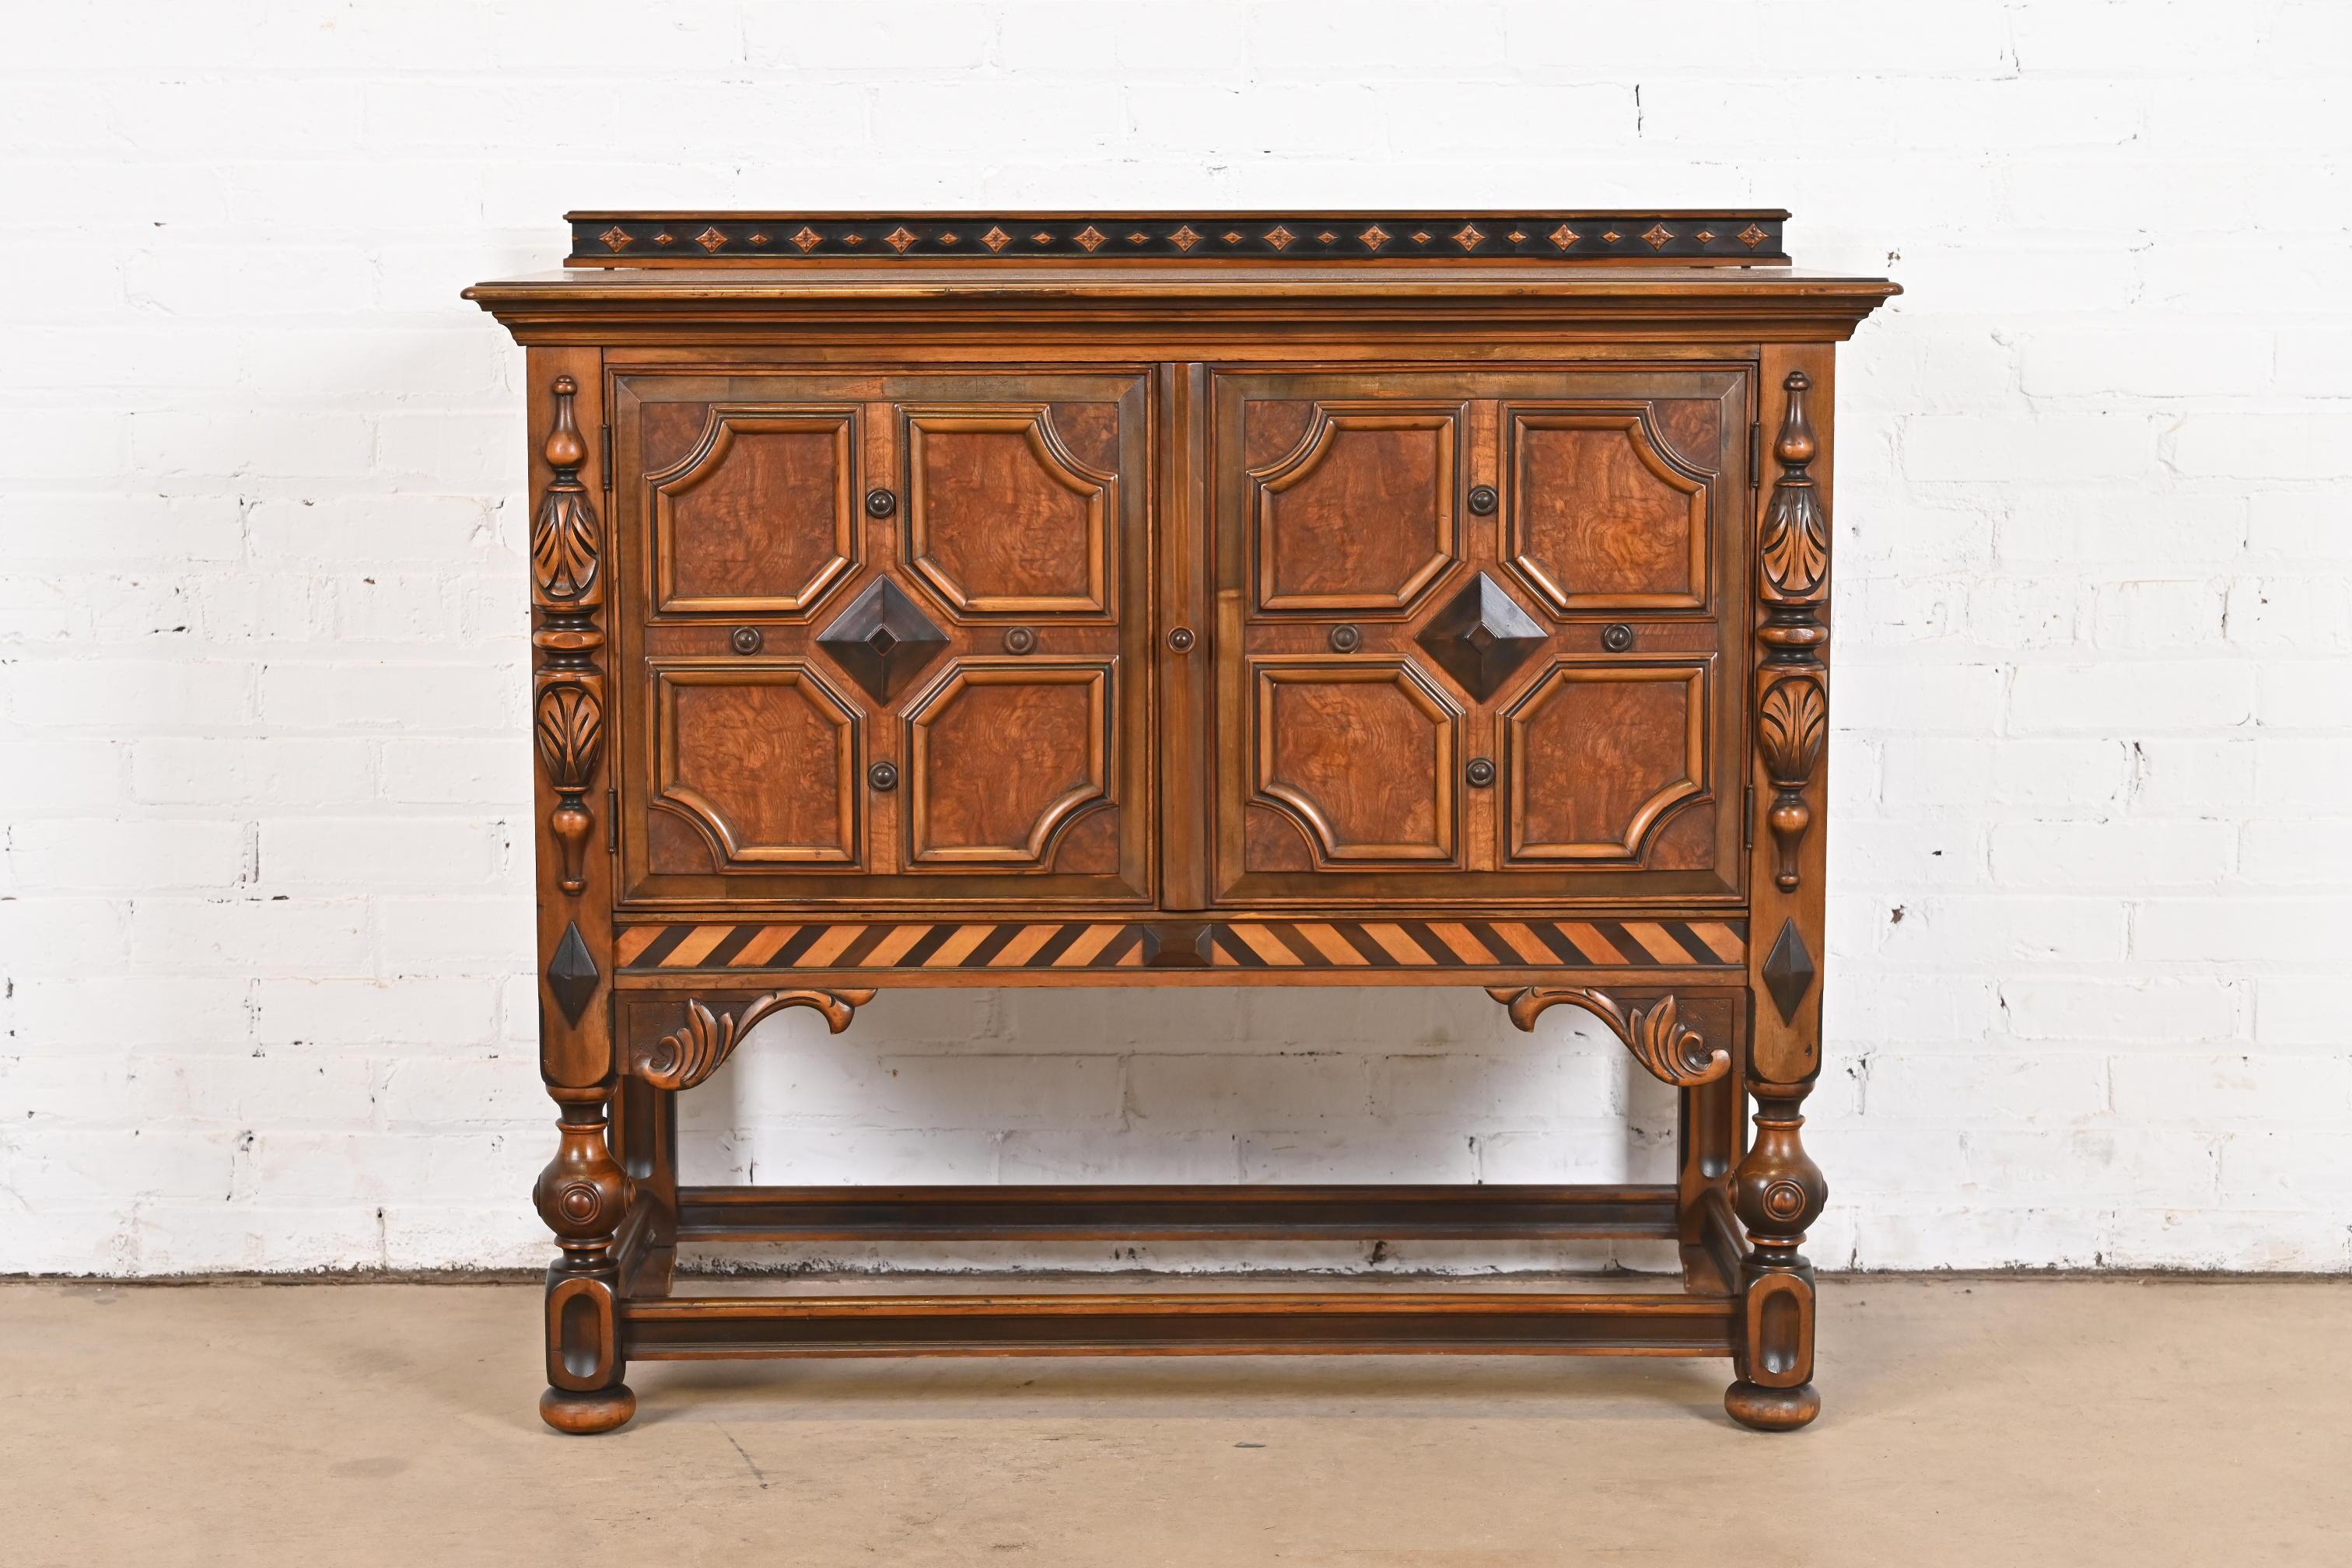 An exceptional English Jacobean style sideboard buffet, credenza, or bar cabinet

By Berkey & Gay

USA, Circa 1920s

Ornate carved walnut, with inlaid burl wood door fronts.

Measures: 41